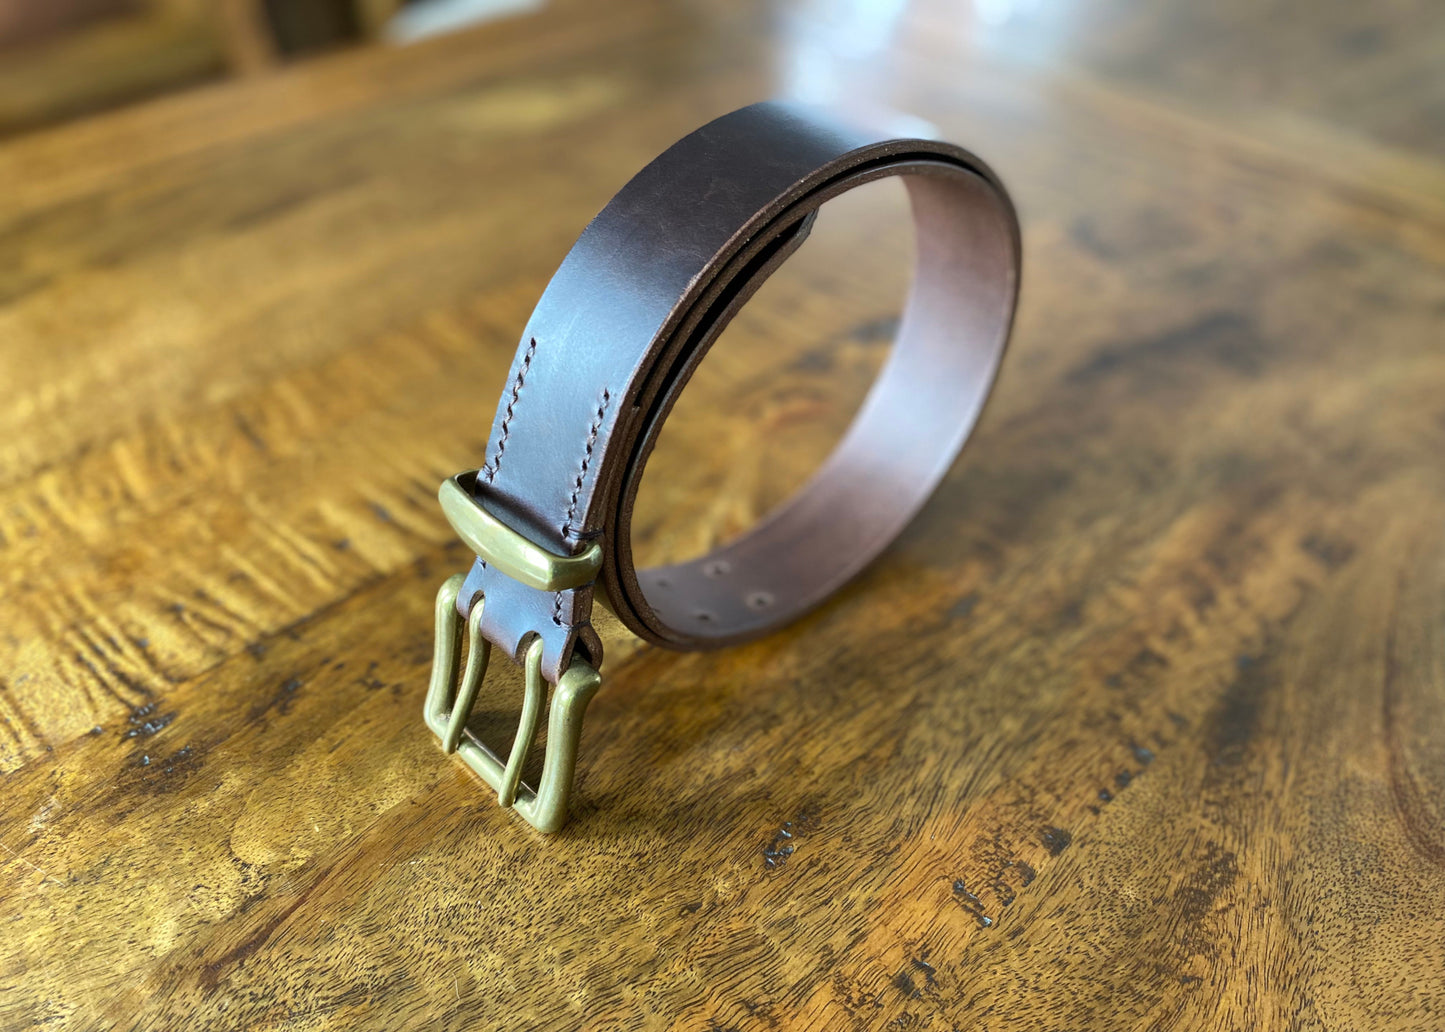 Dark Brown Leather Belt - 2 prong Brass buckle - 1.5" (38mm wide) - Full Grain Leather - Hand Stitched